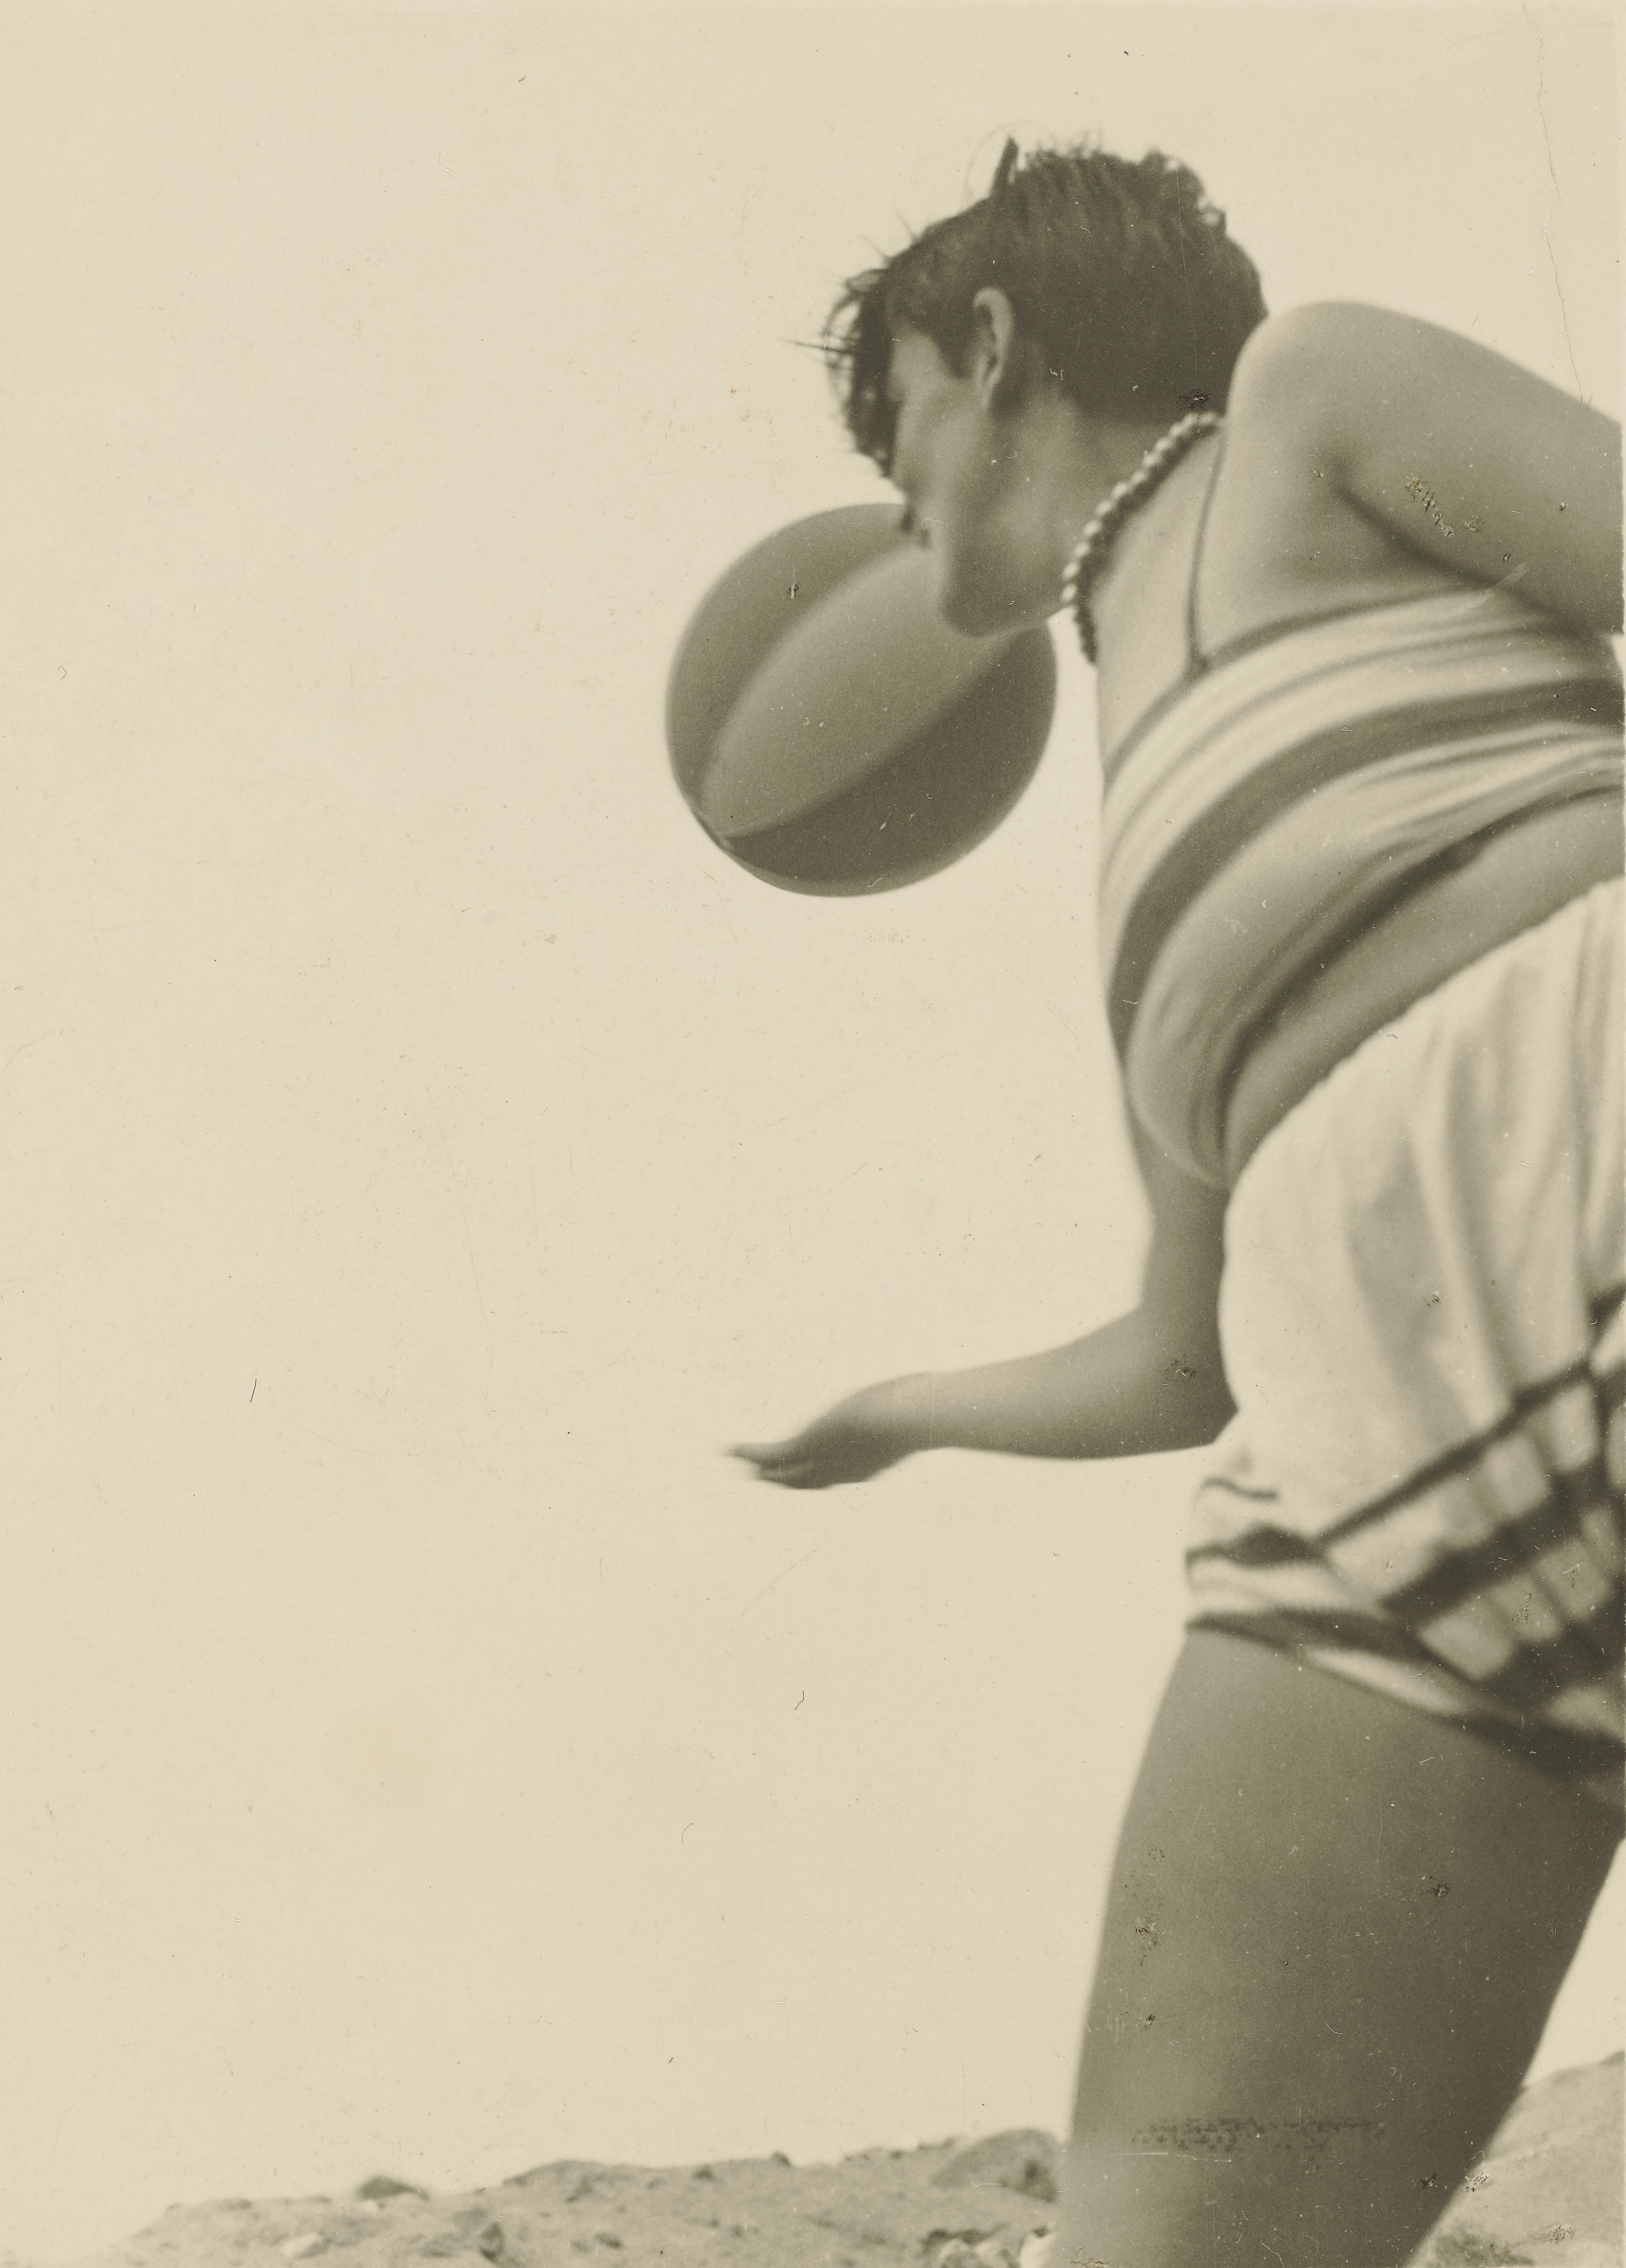 A woman in a striped suit bounces a beach ball, slightly off frame